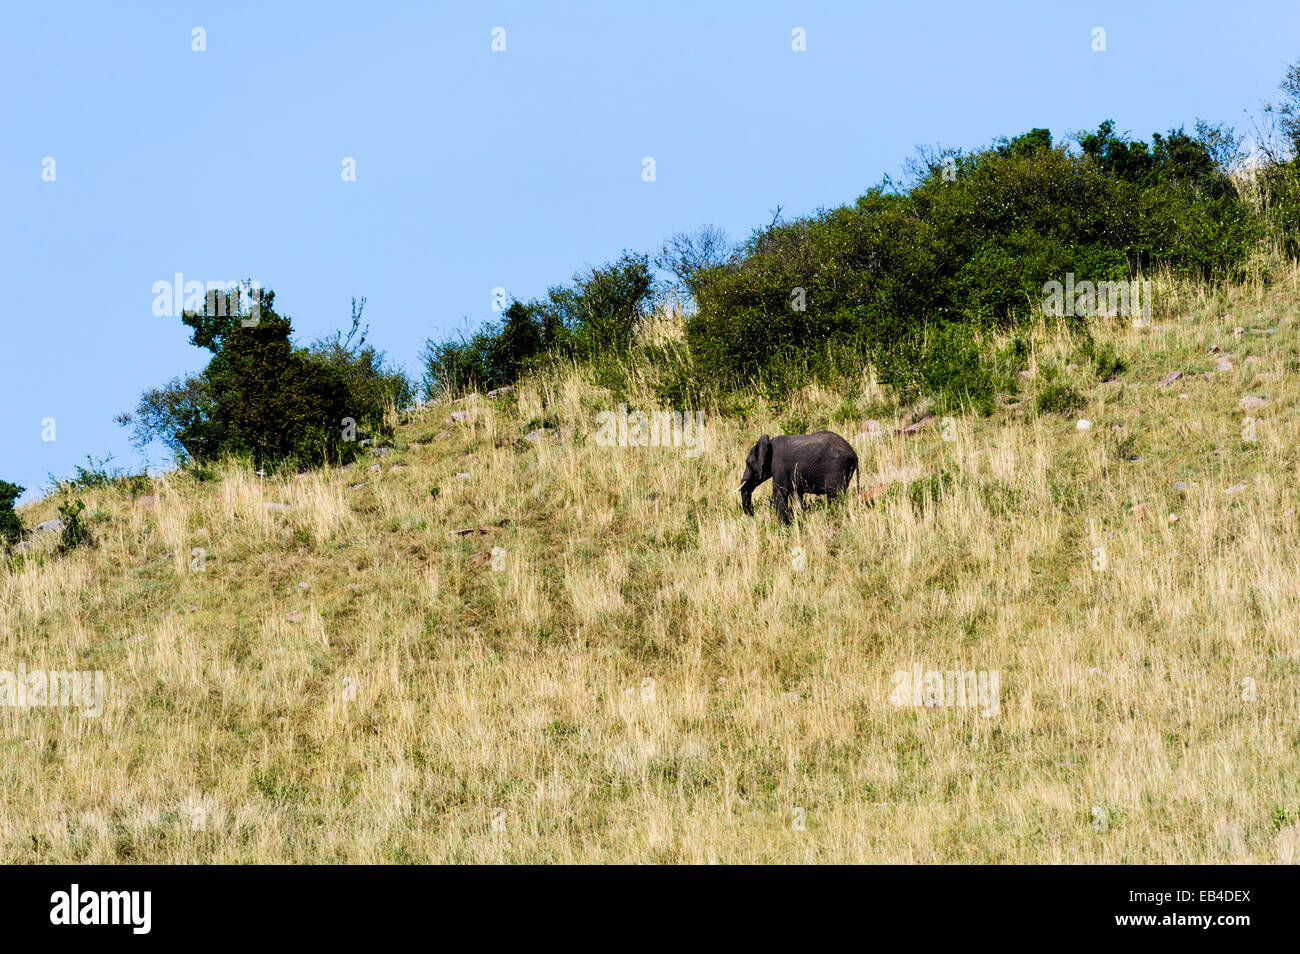 A sub-adult African Elephant descending a small hill on the savannah. Stock Photo